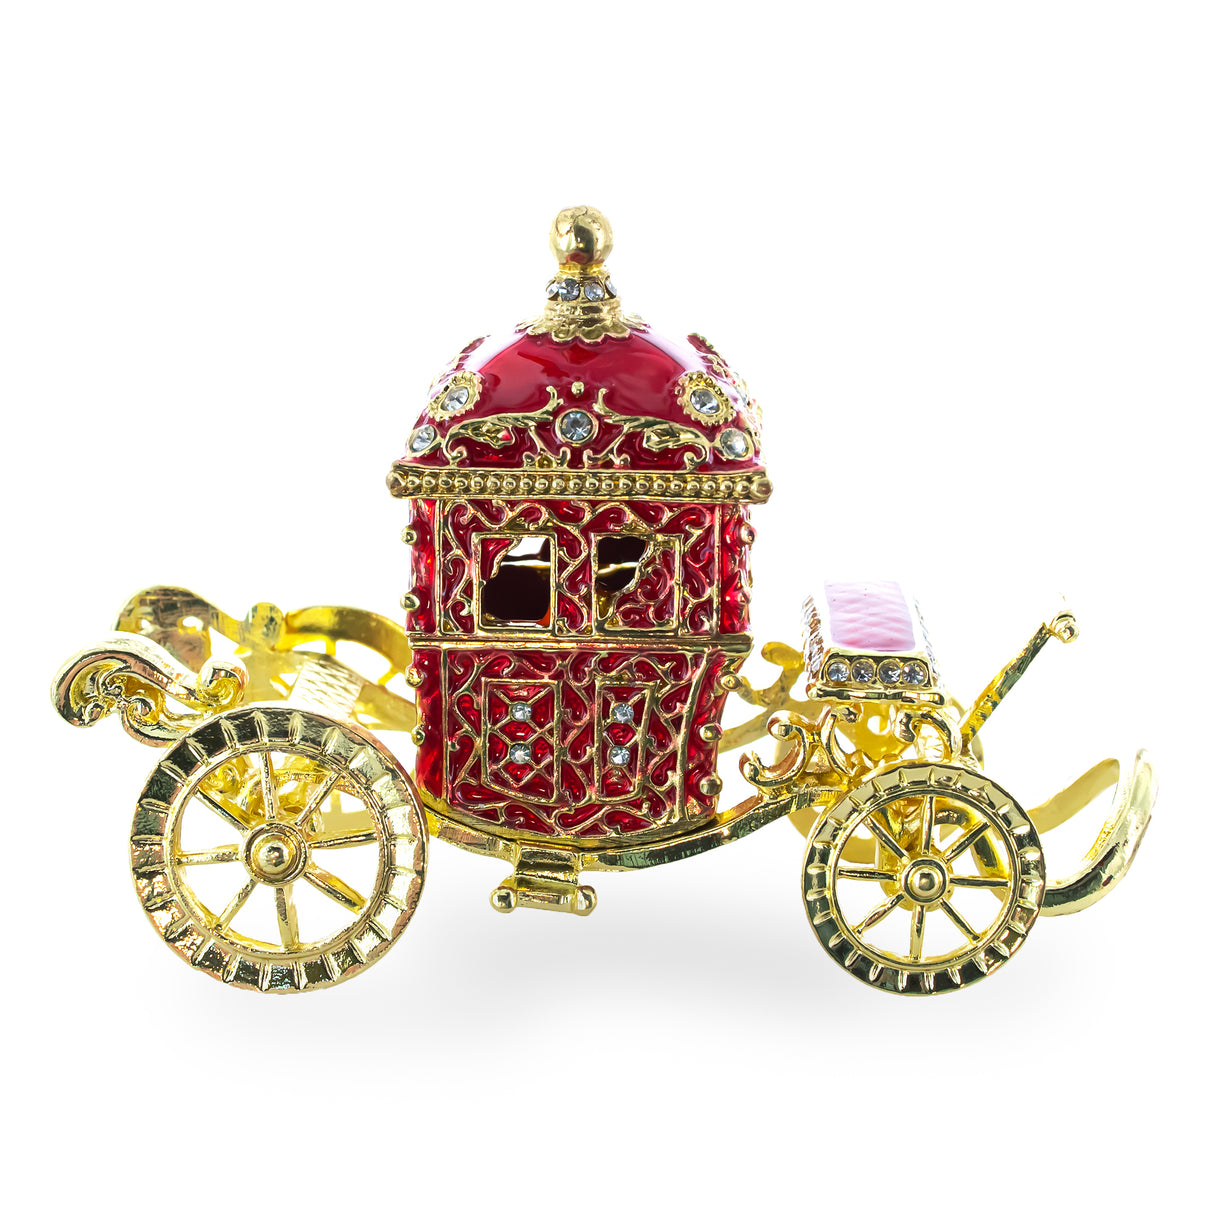 BestPysanky online gift shop sells music vintage Royal Imperial Faberge Russian enameled jeweled crystal trinket boxes antique style inspired unique collectible figurine